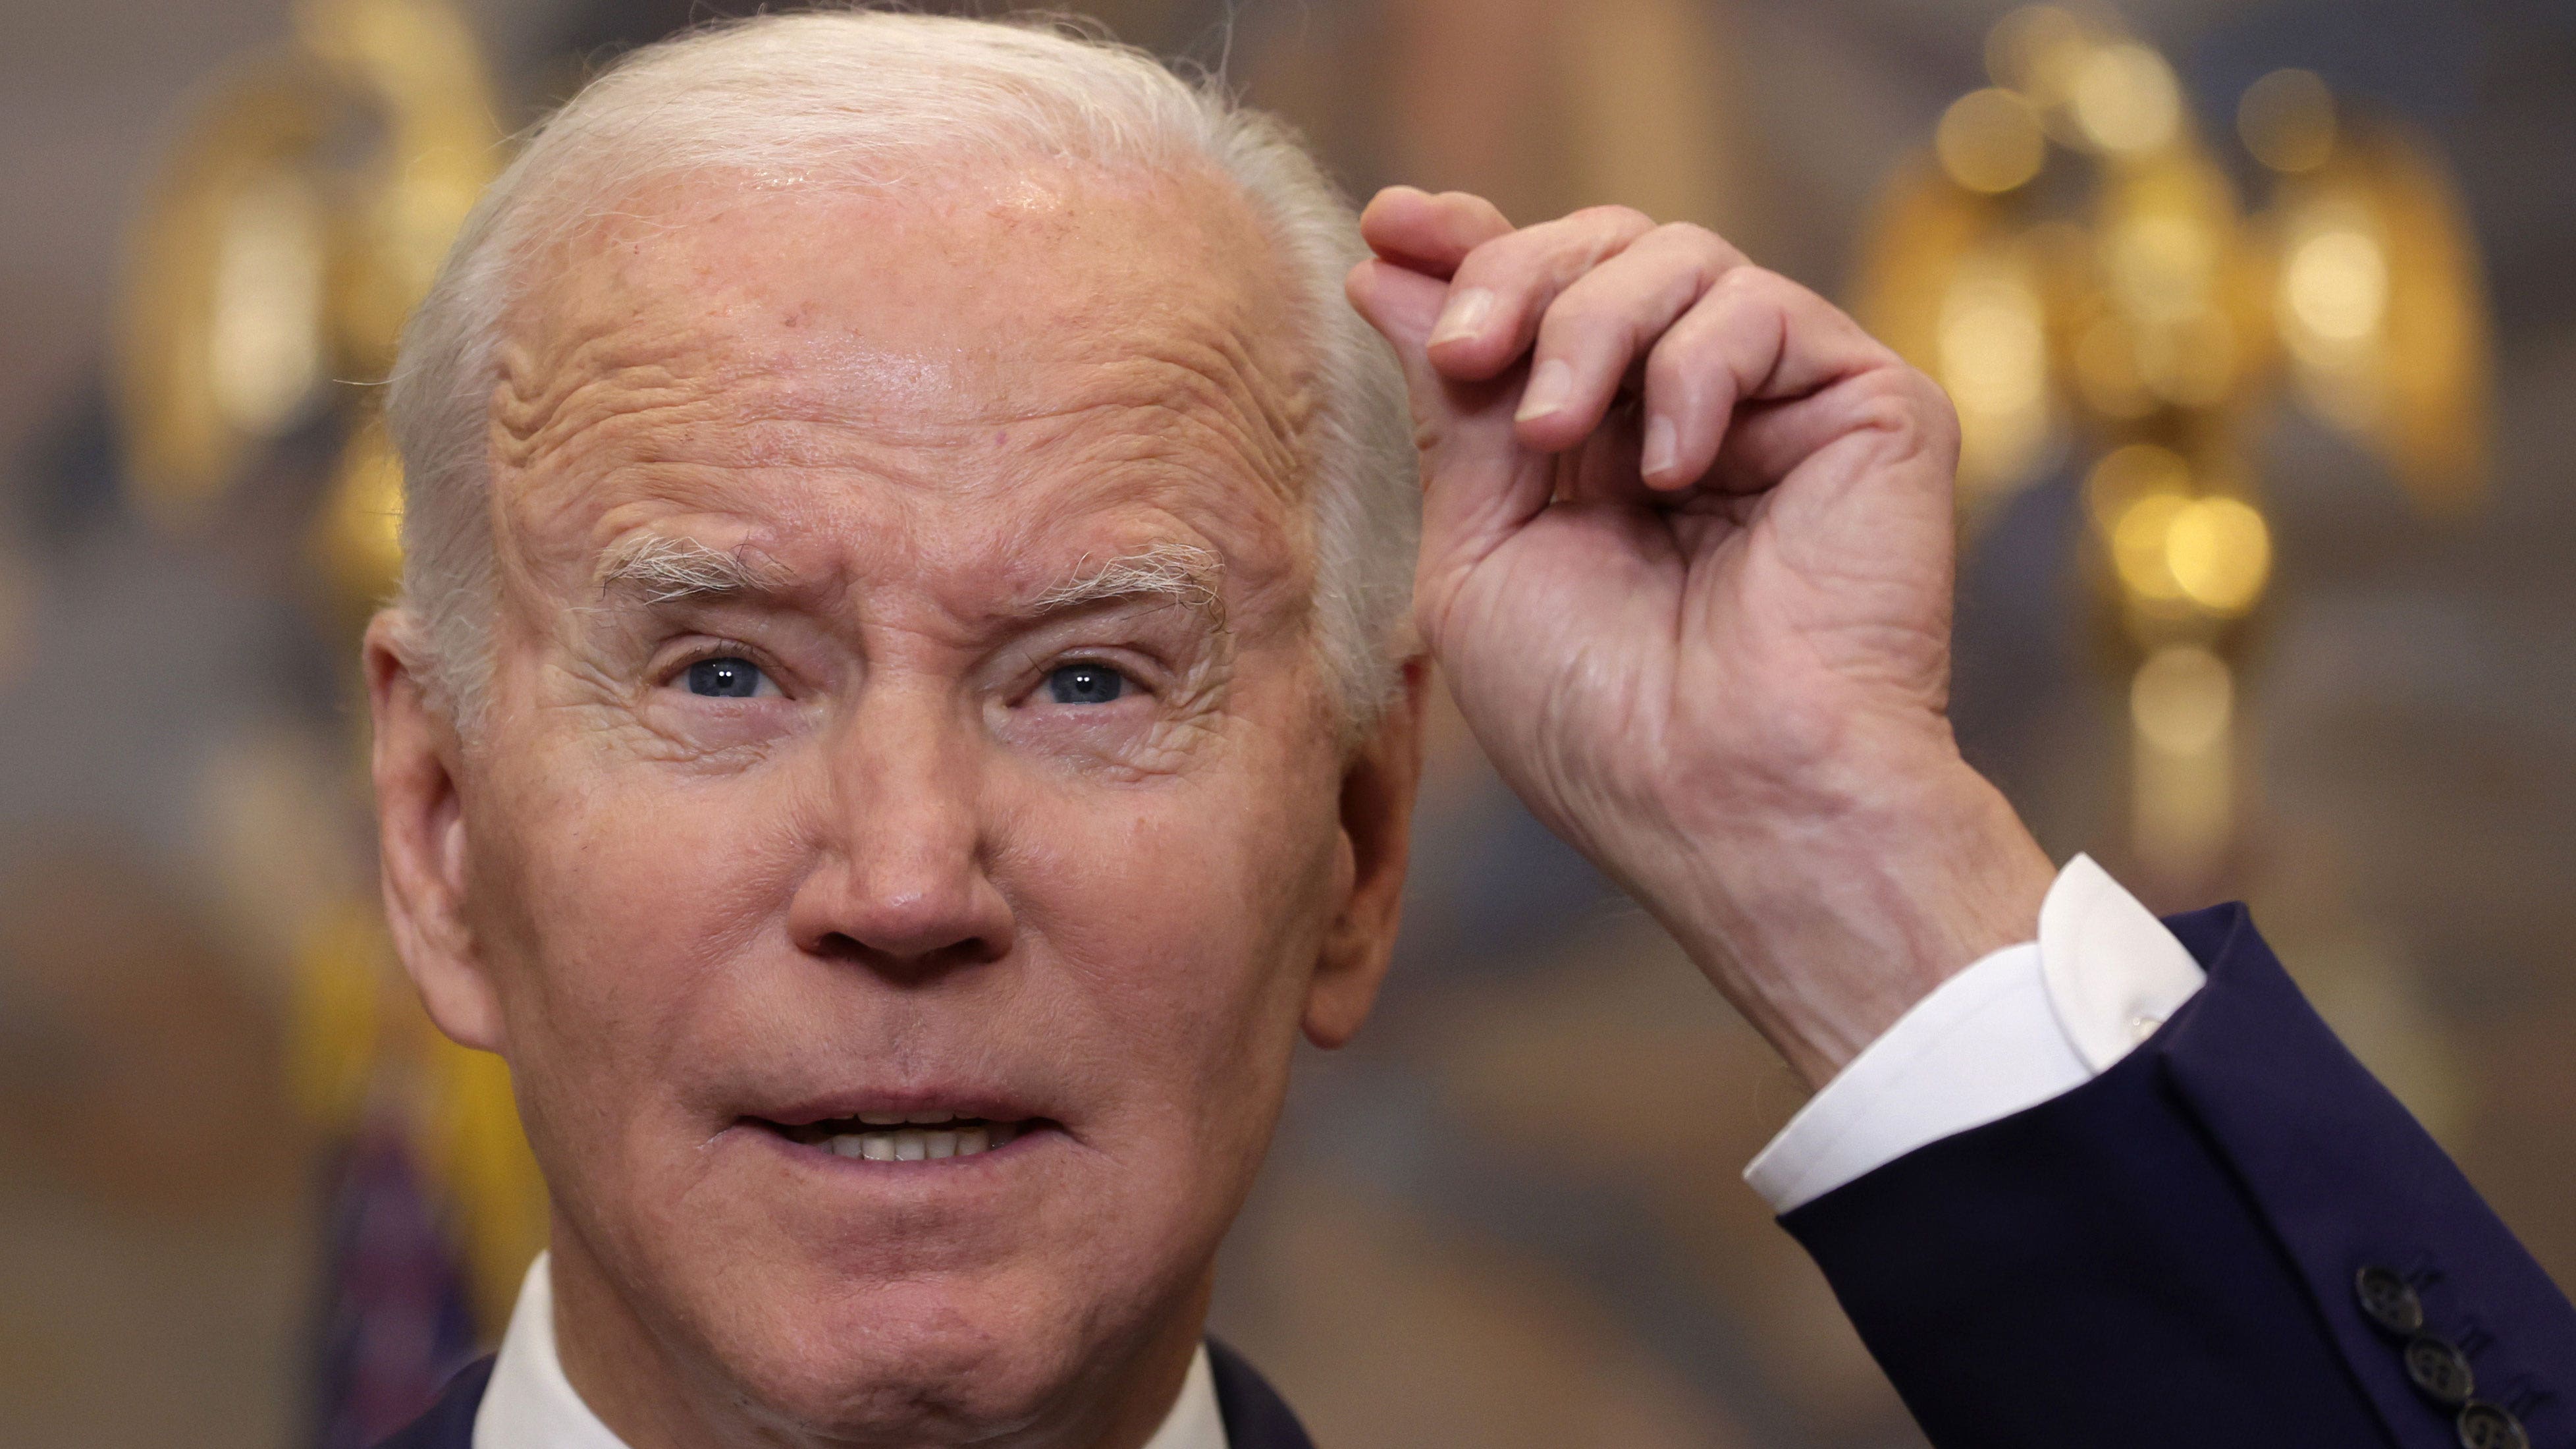 Majority of Democrats don’t want Biden to seek re-election, as president weighs second term